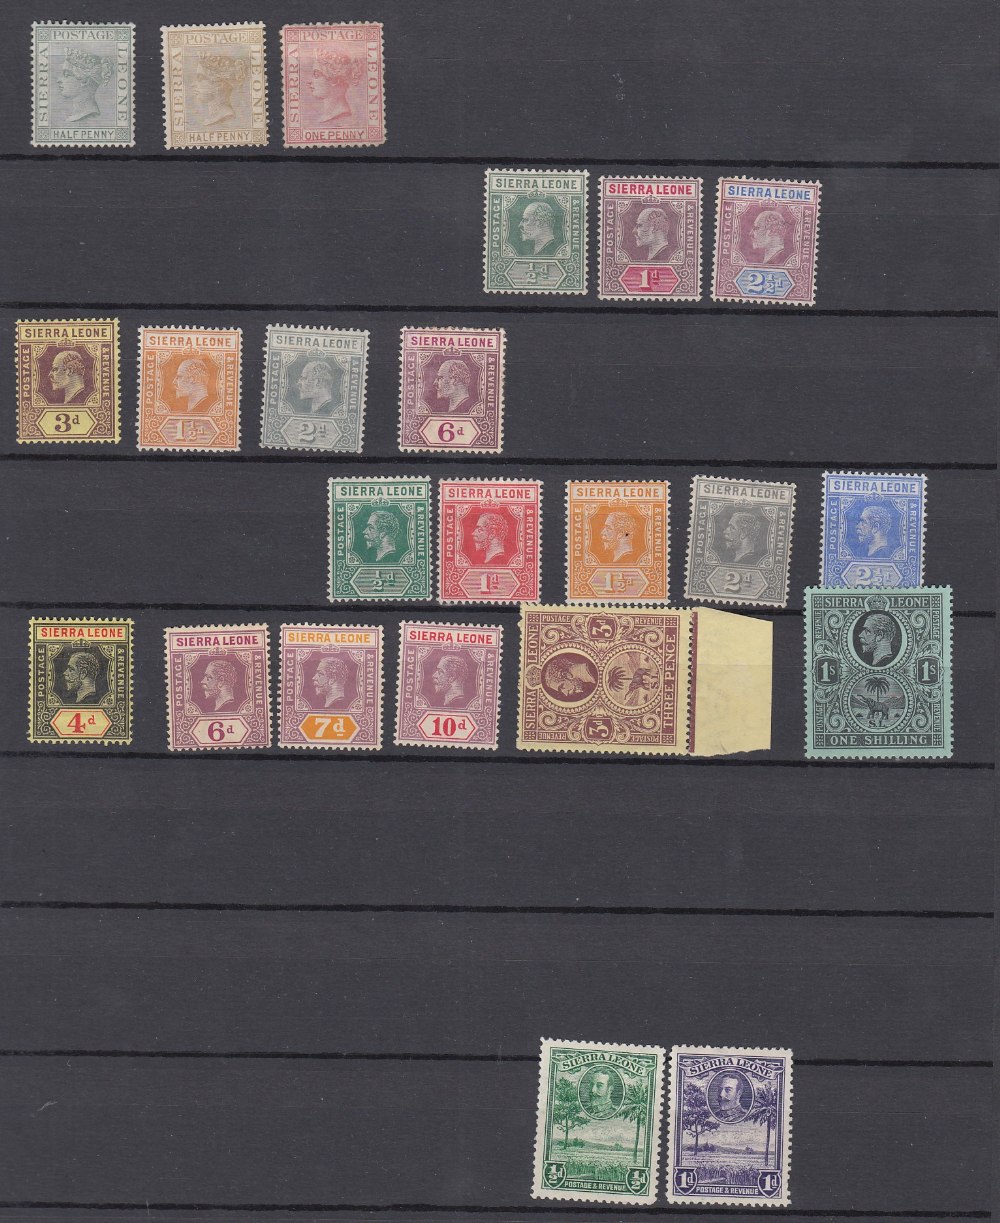 STAMPS British Commonwealth mint collection in large stock book, including Australia and States, - Image 5 of 5